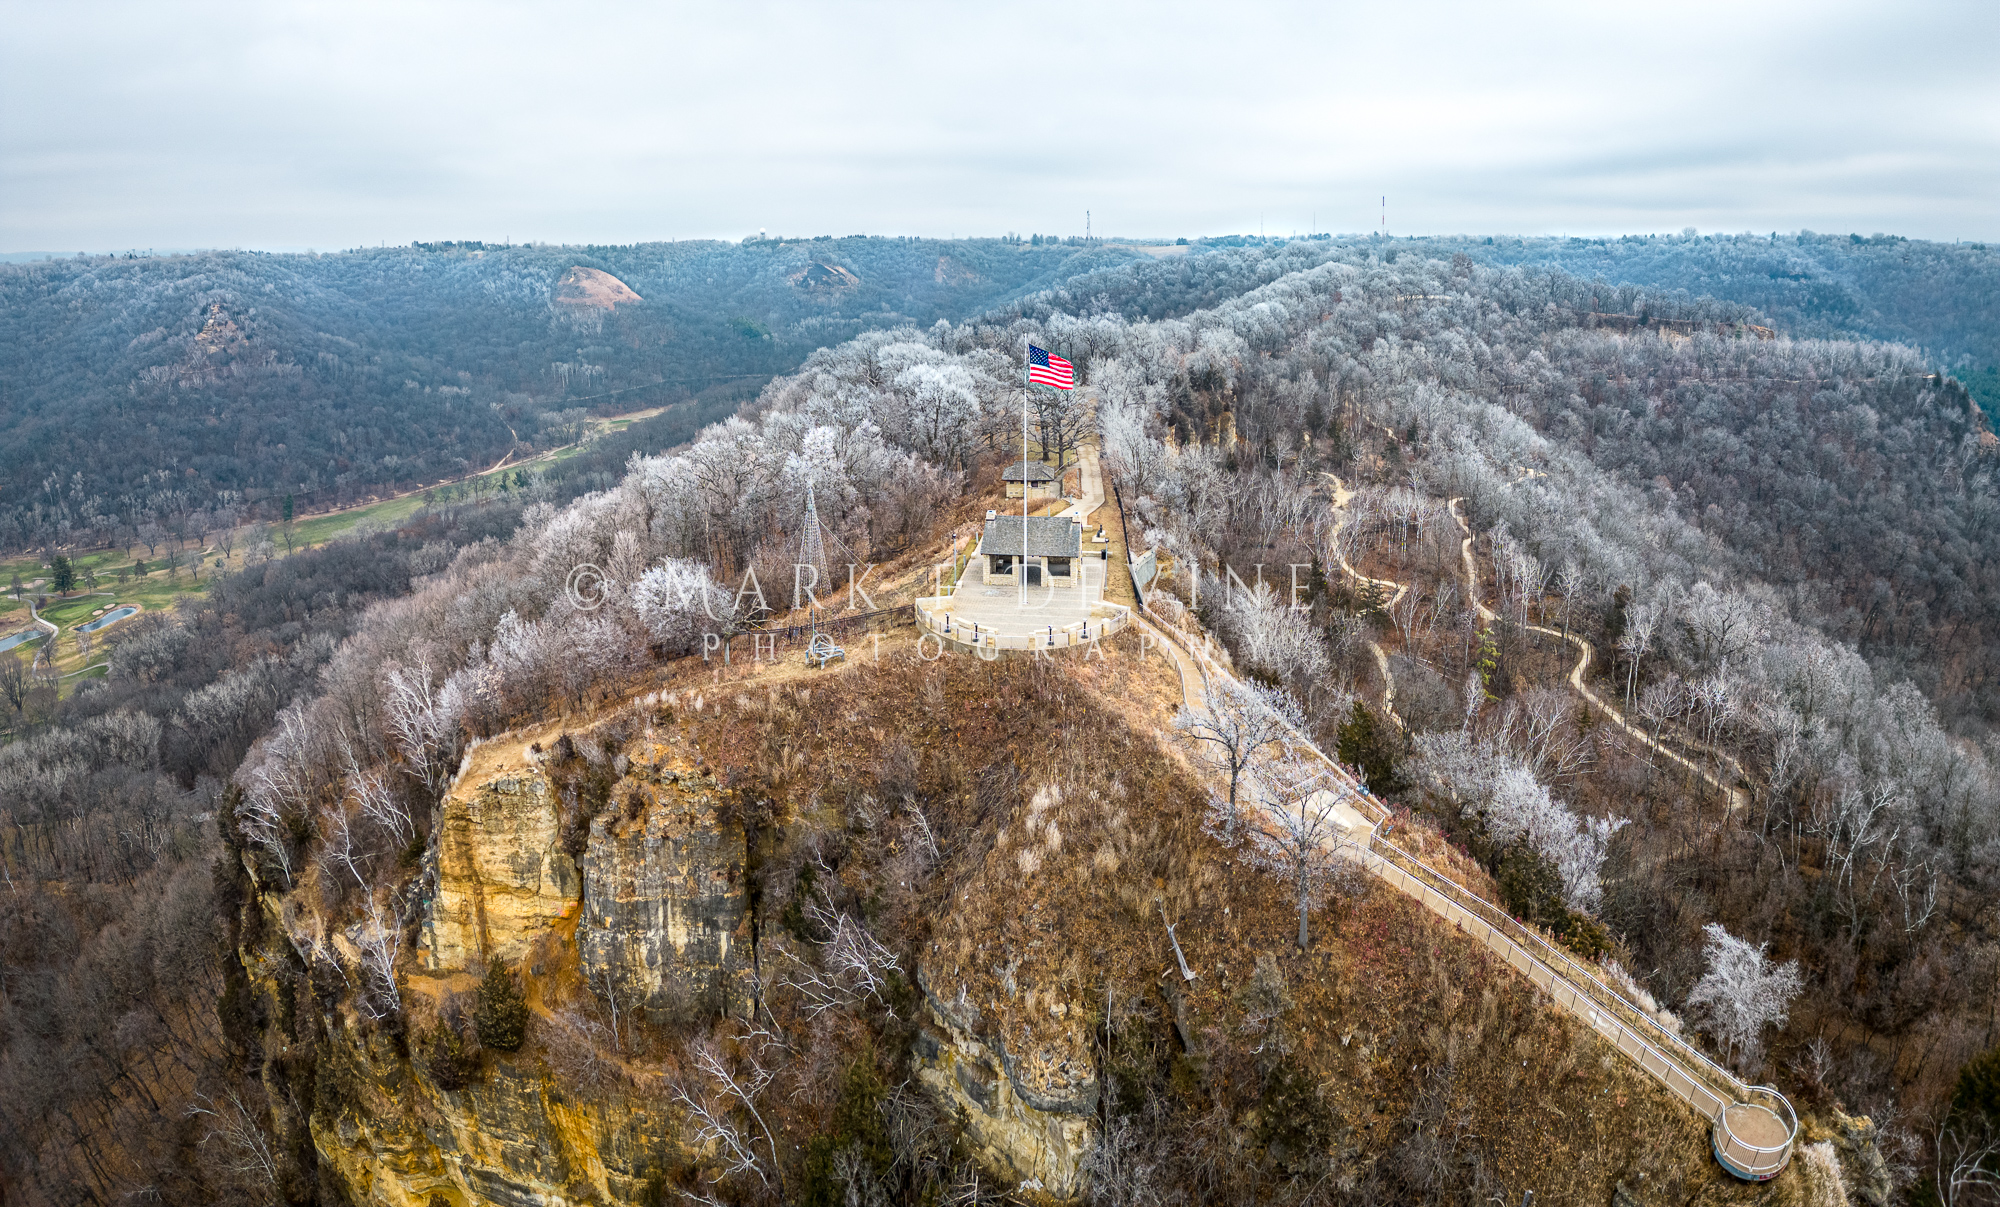 A close-up view of the summit of Grandad Bluff in La Crosse, Wisconsin.  Rime ice had frosted the trees along the ridgeline and...